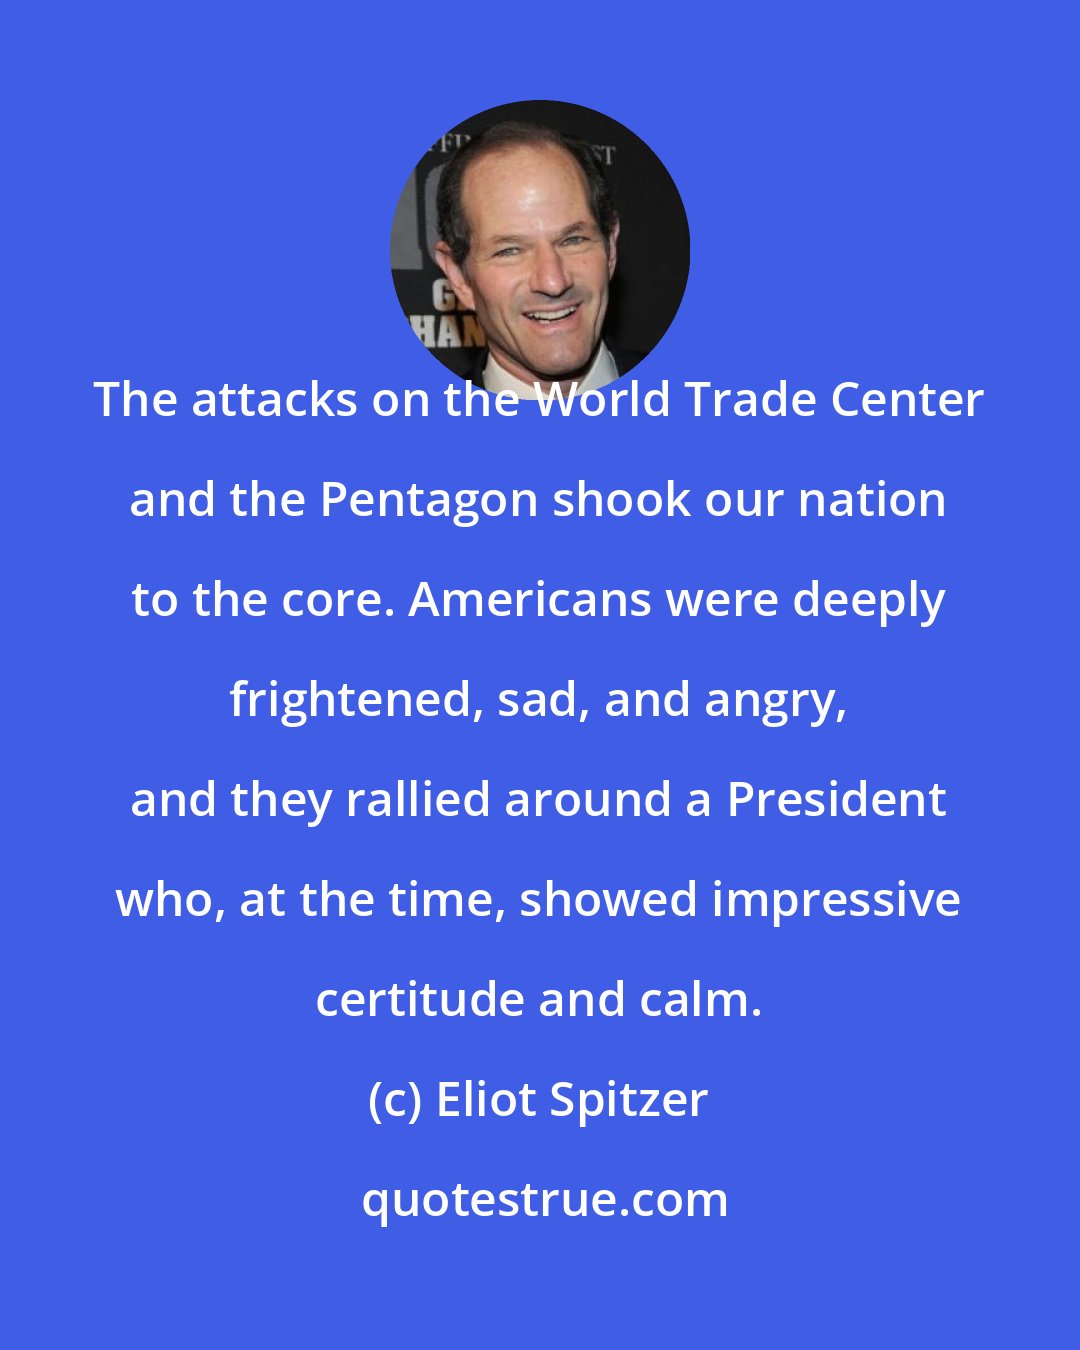 Eliot Spitzer: The attacks on the World Trade Center and the Pentagon shook our nation to the core. Americans were deeply frightened, sad, and angry, and they rallied around a President who, at the time, showed impressive certitude and calm.